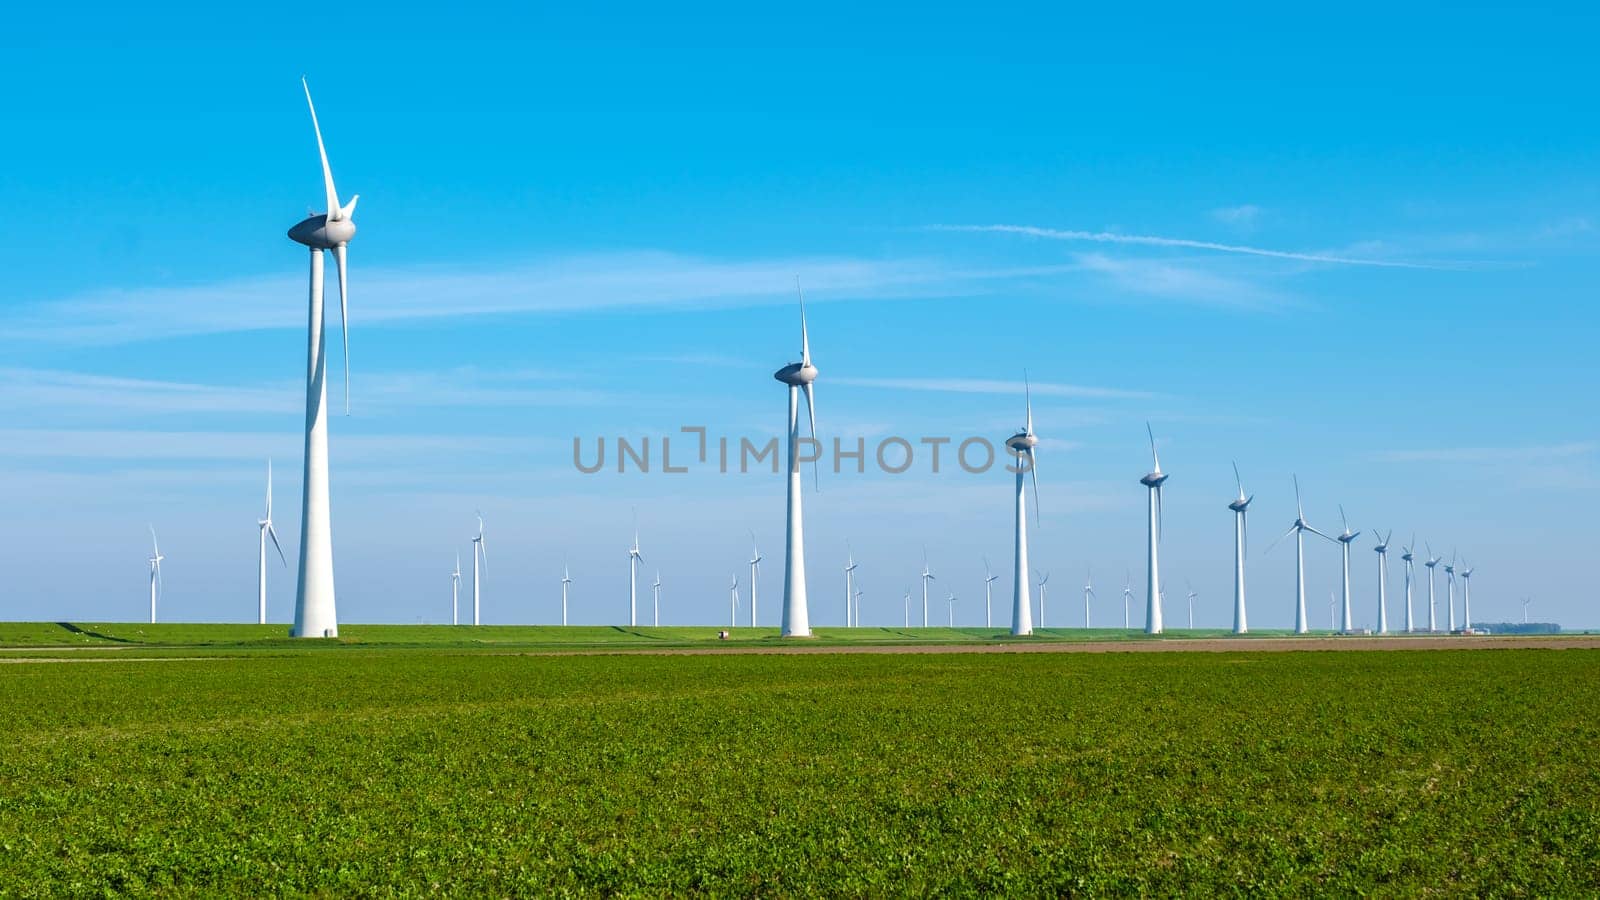 A symphony of wind turbines standing tall in a lush green field in the Netherlands, Flevoland. huge windmill turbines in a agricultural field with a blue sky, energy transition